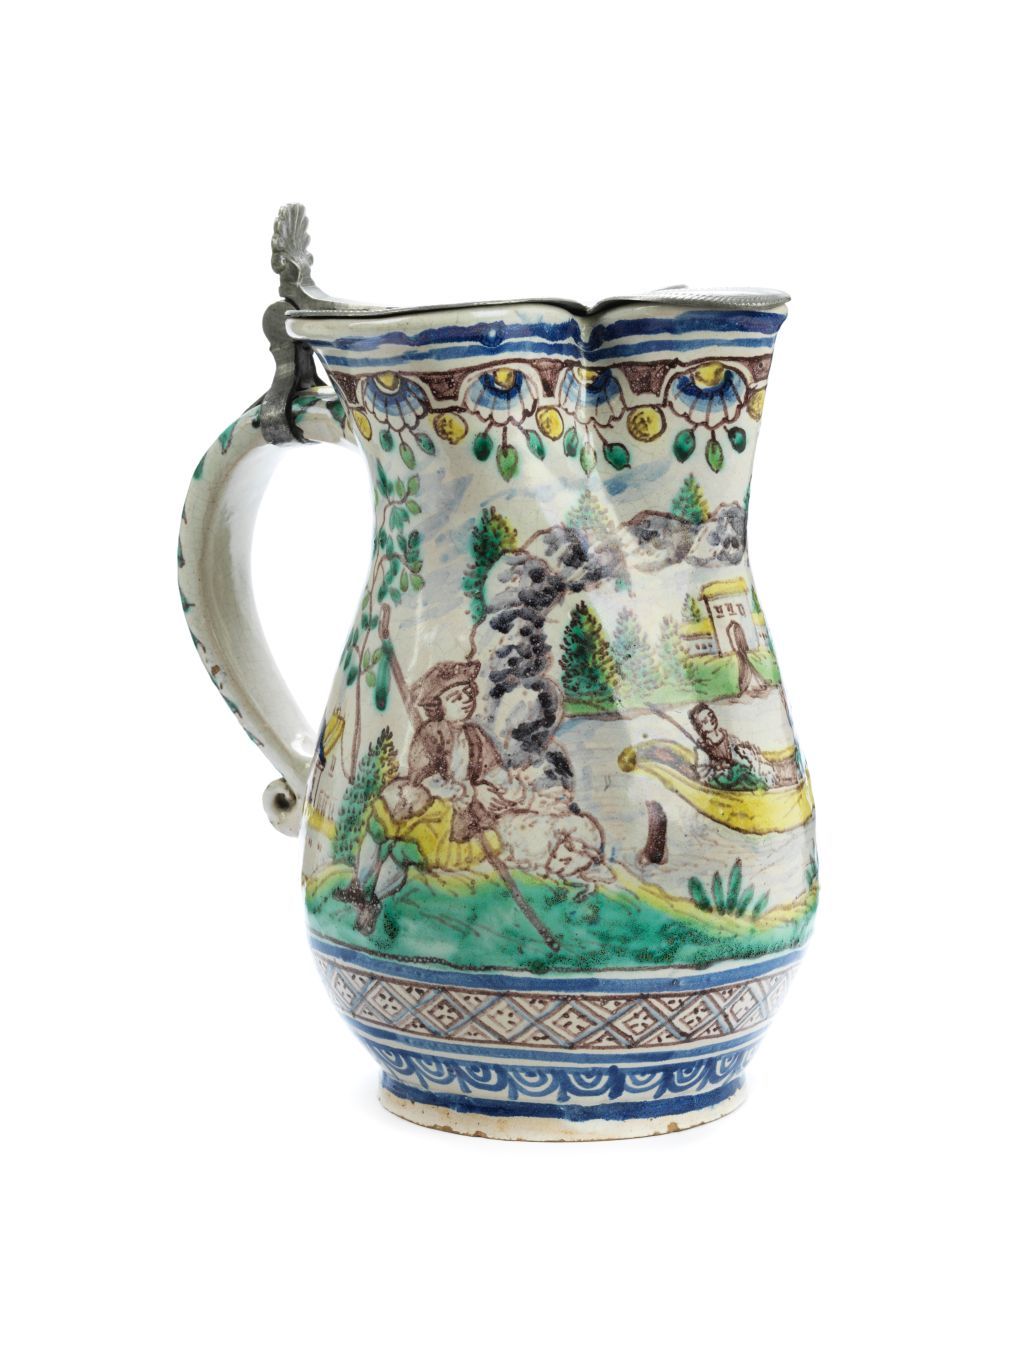 gmund-faience-jug-marriage-dated-1764